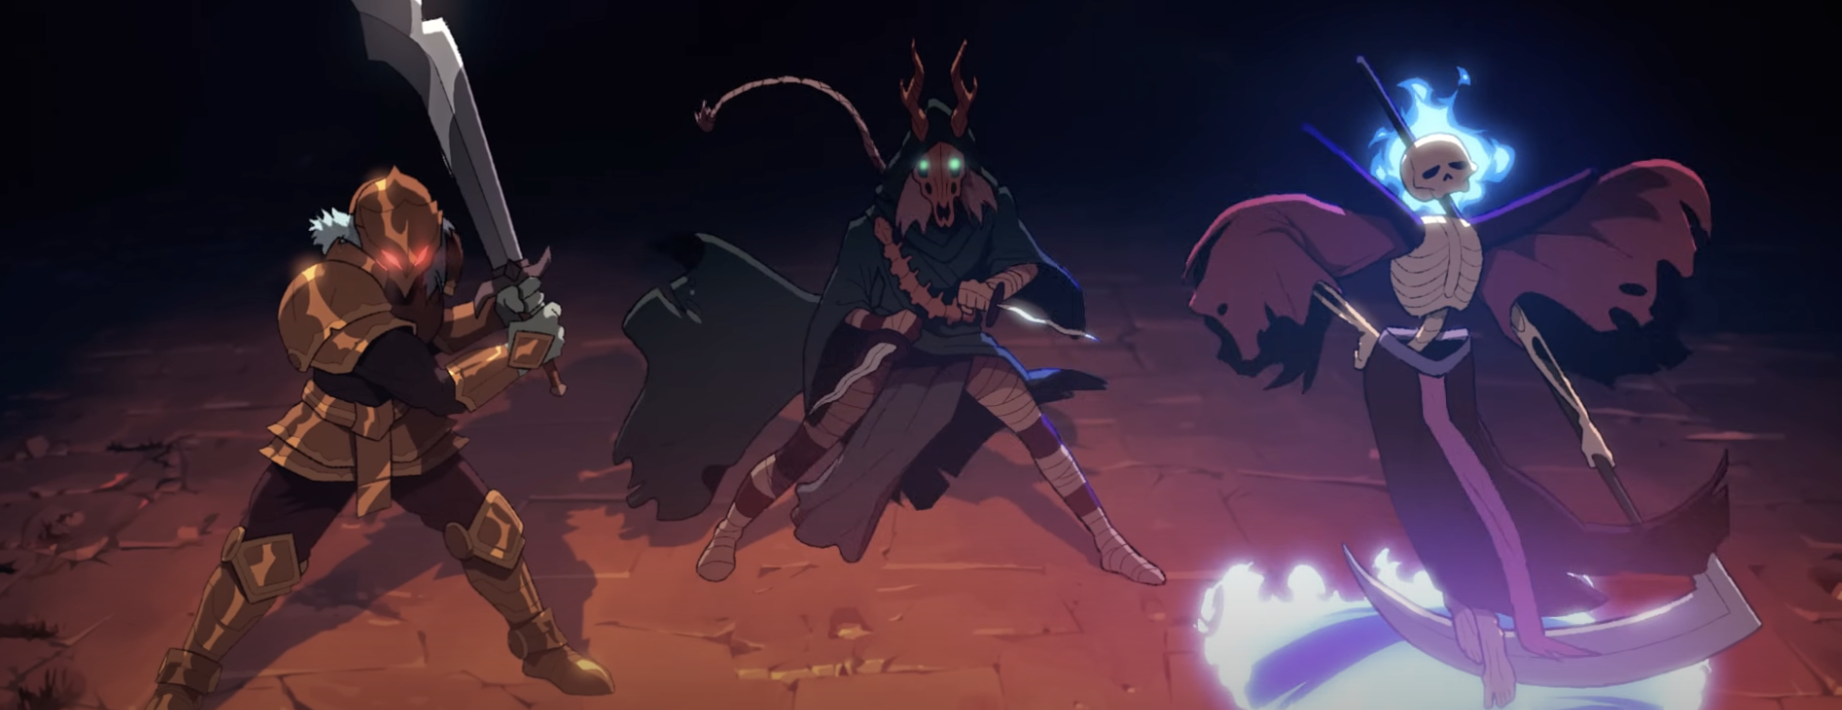 A screenshot from the trailer showing three Slay the Spire 2 characters